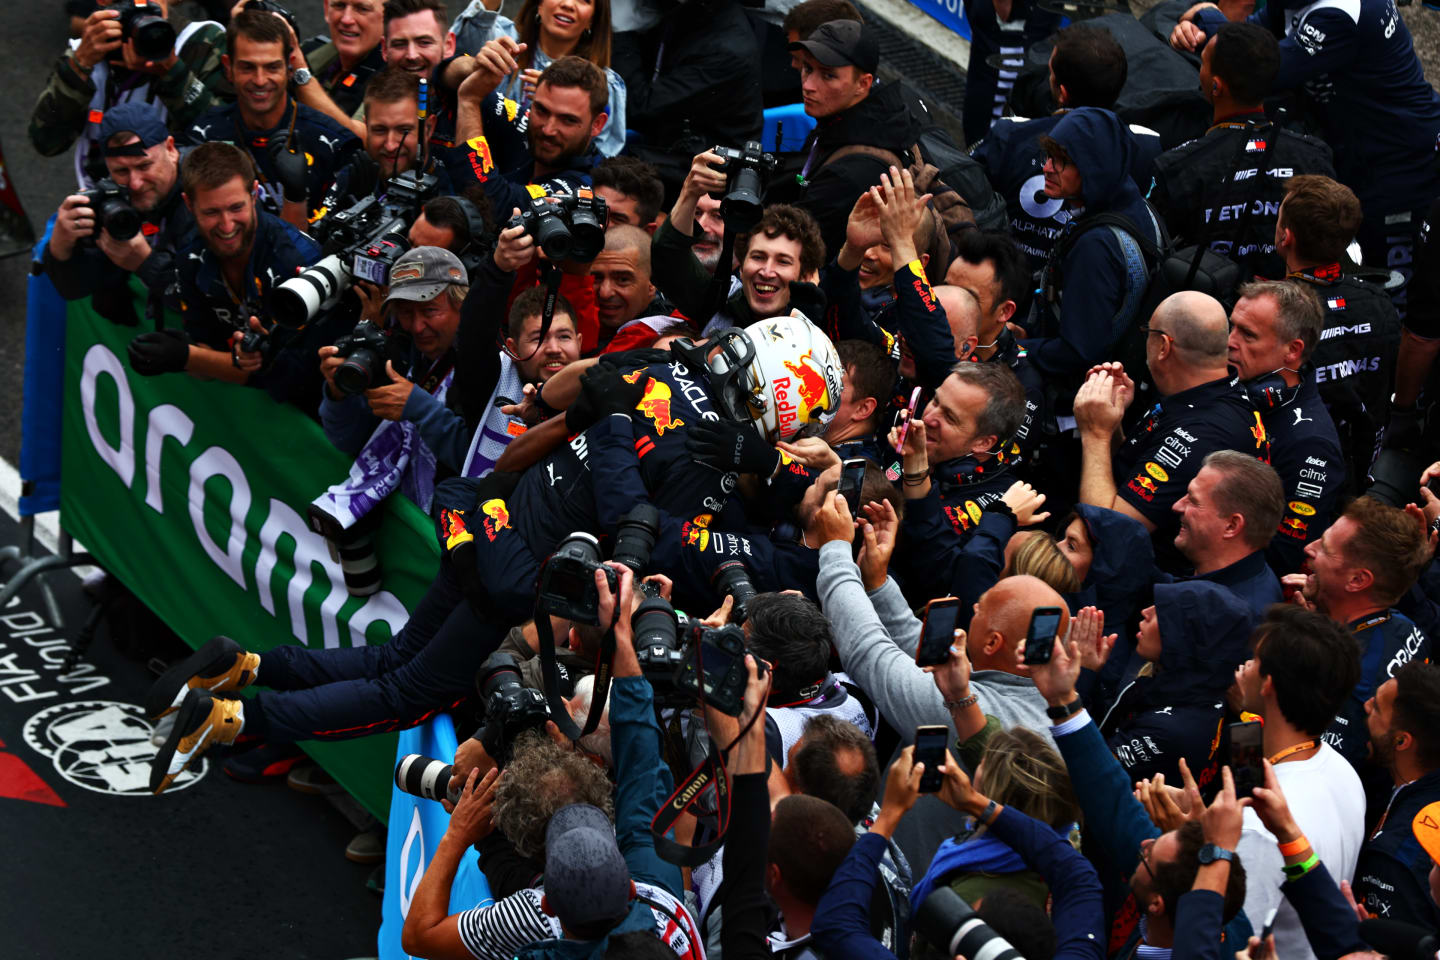 BUDAPEST, HUNGARY - JULY 31: Race winner Max Verstappen of the Netherlands and Oracle Red Bull